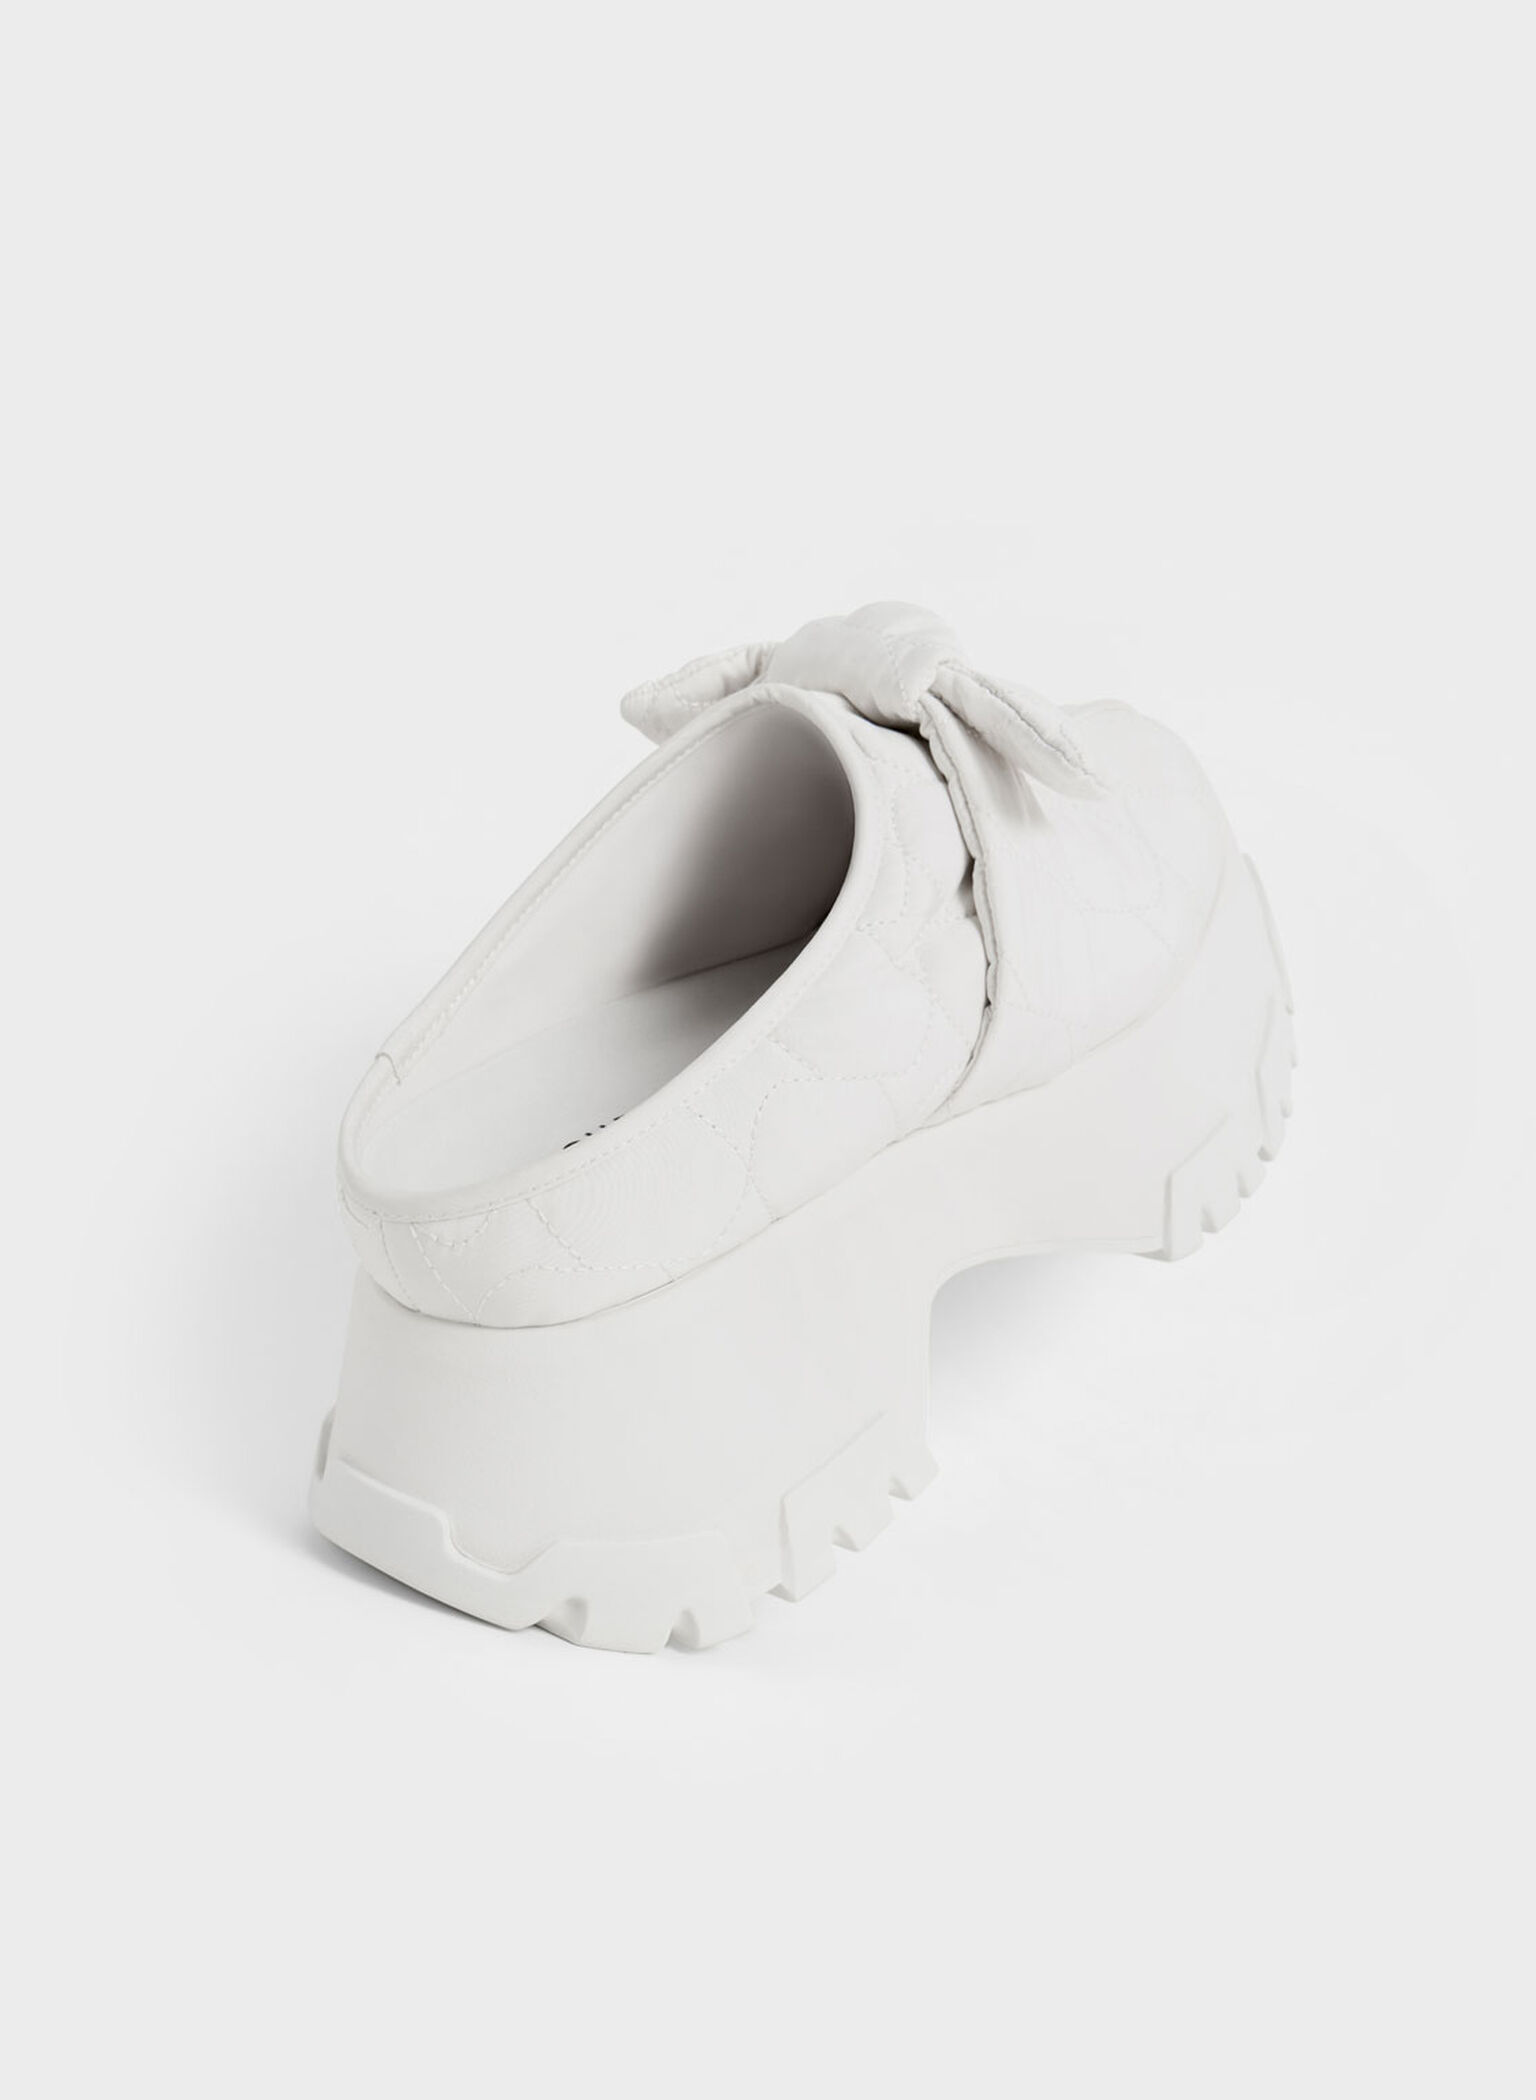 Recycled Polyester Knotted Platform Mules, White, hi-res